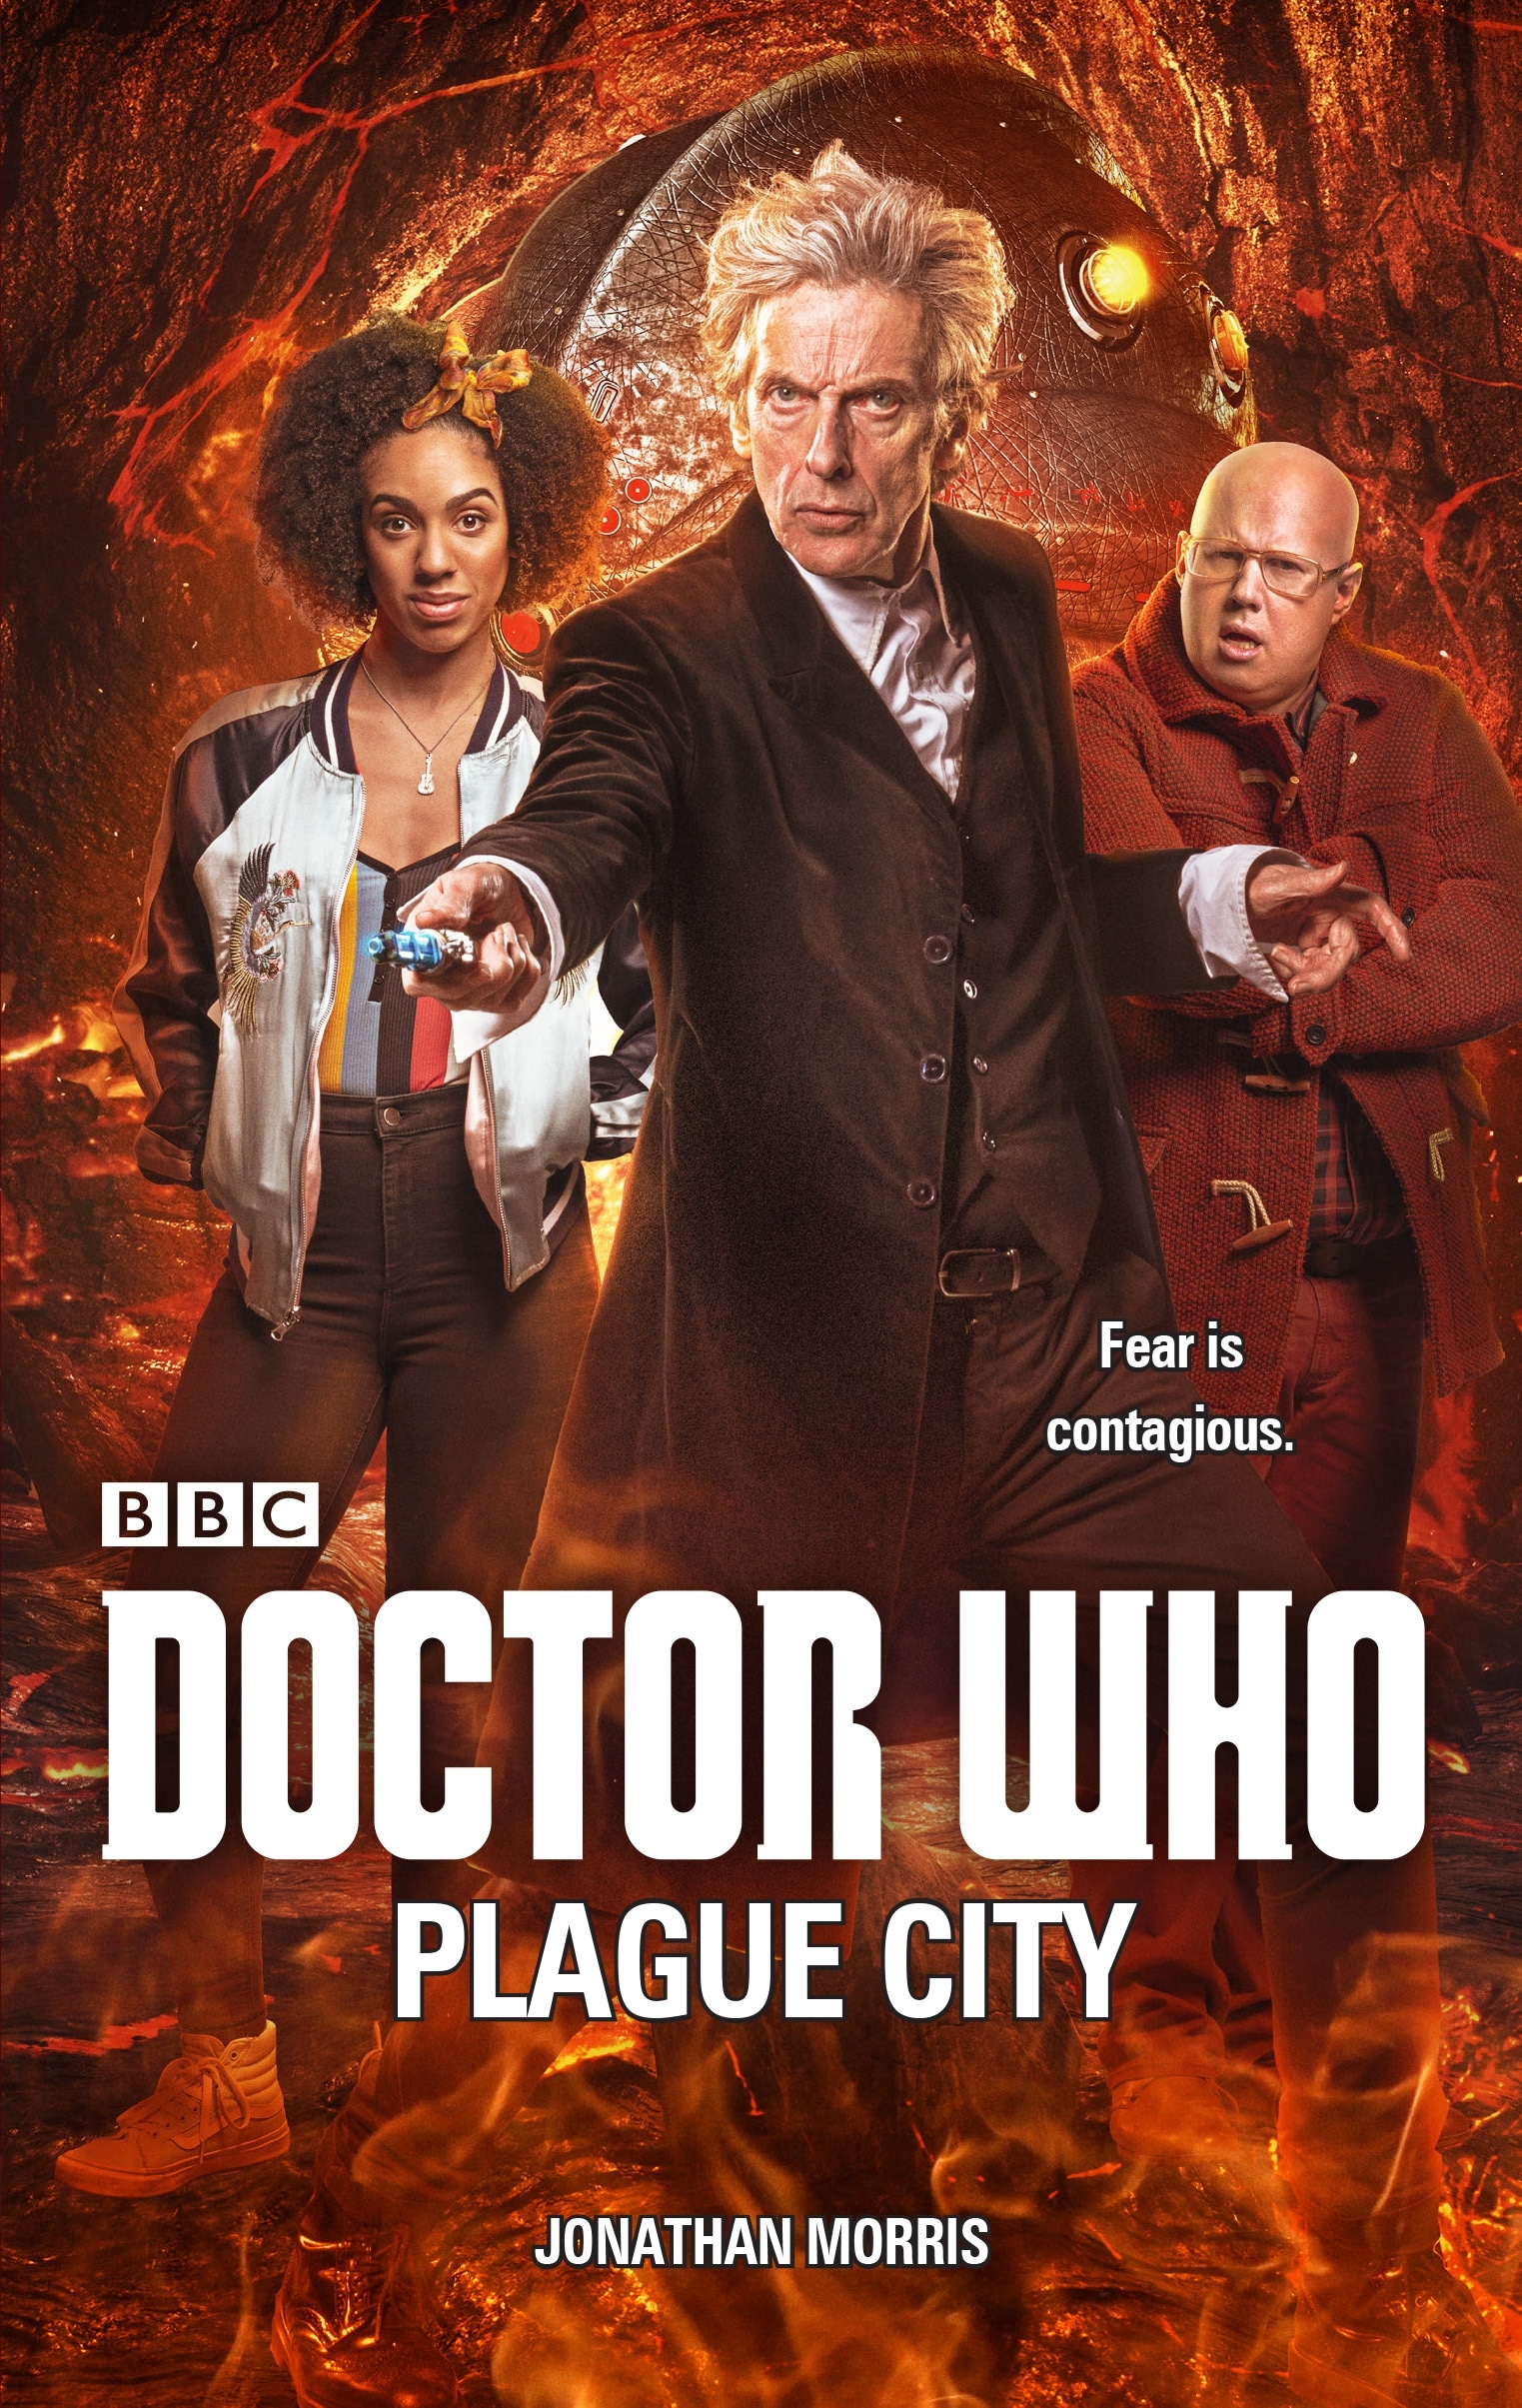 Book “Doctor Who: Plague City” by Jonathan Morris — December 17, 2020